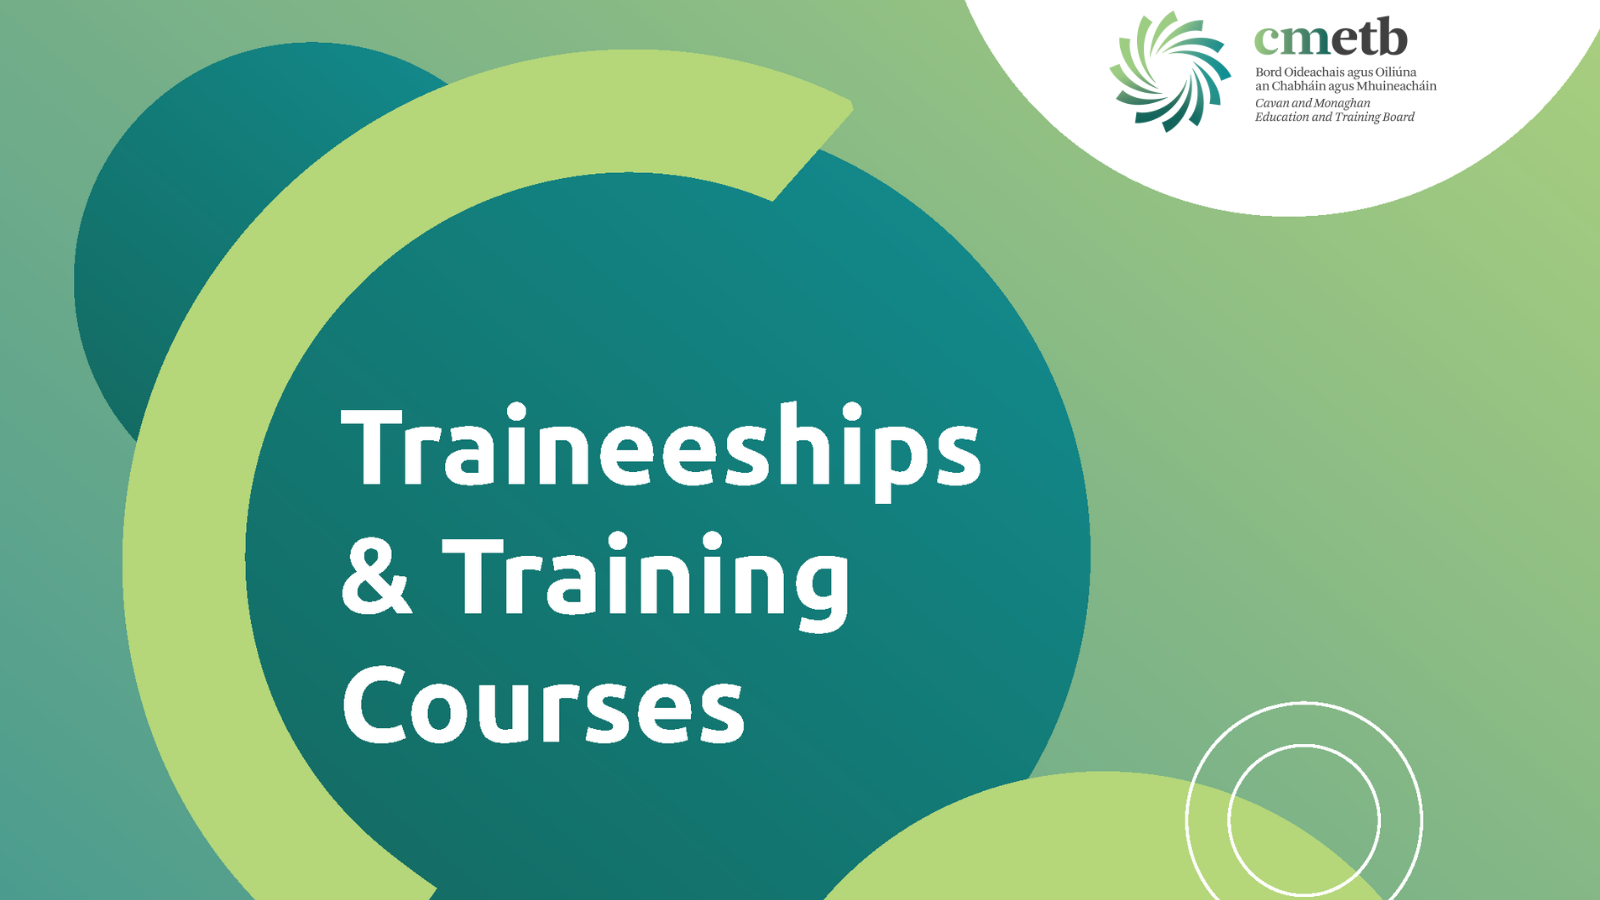 Traineeship and course cover image